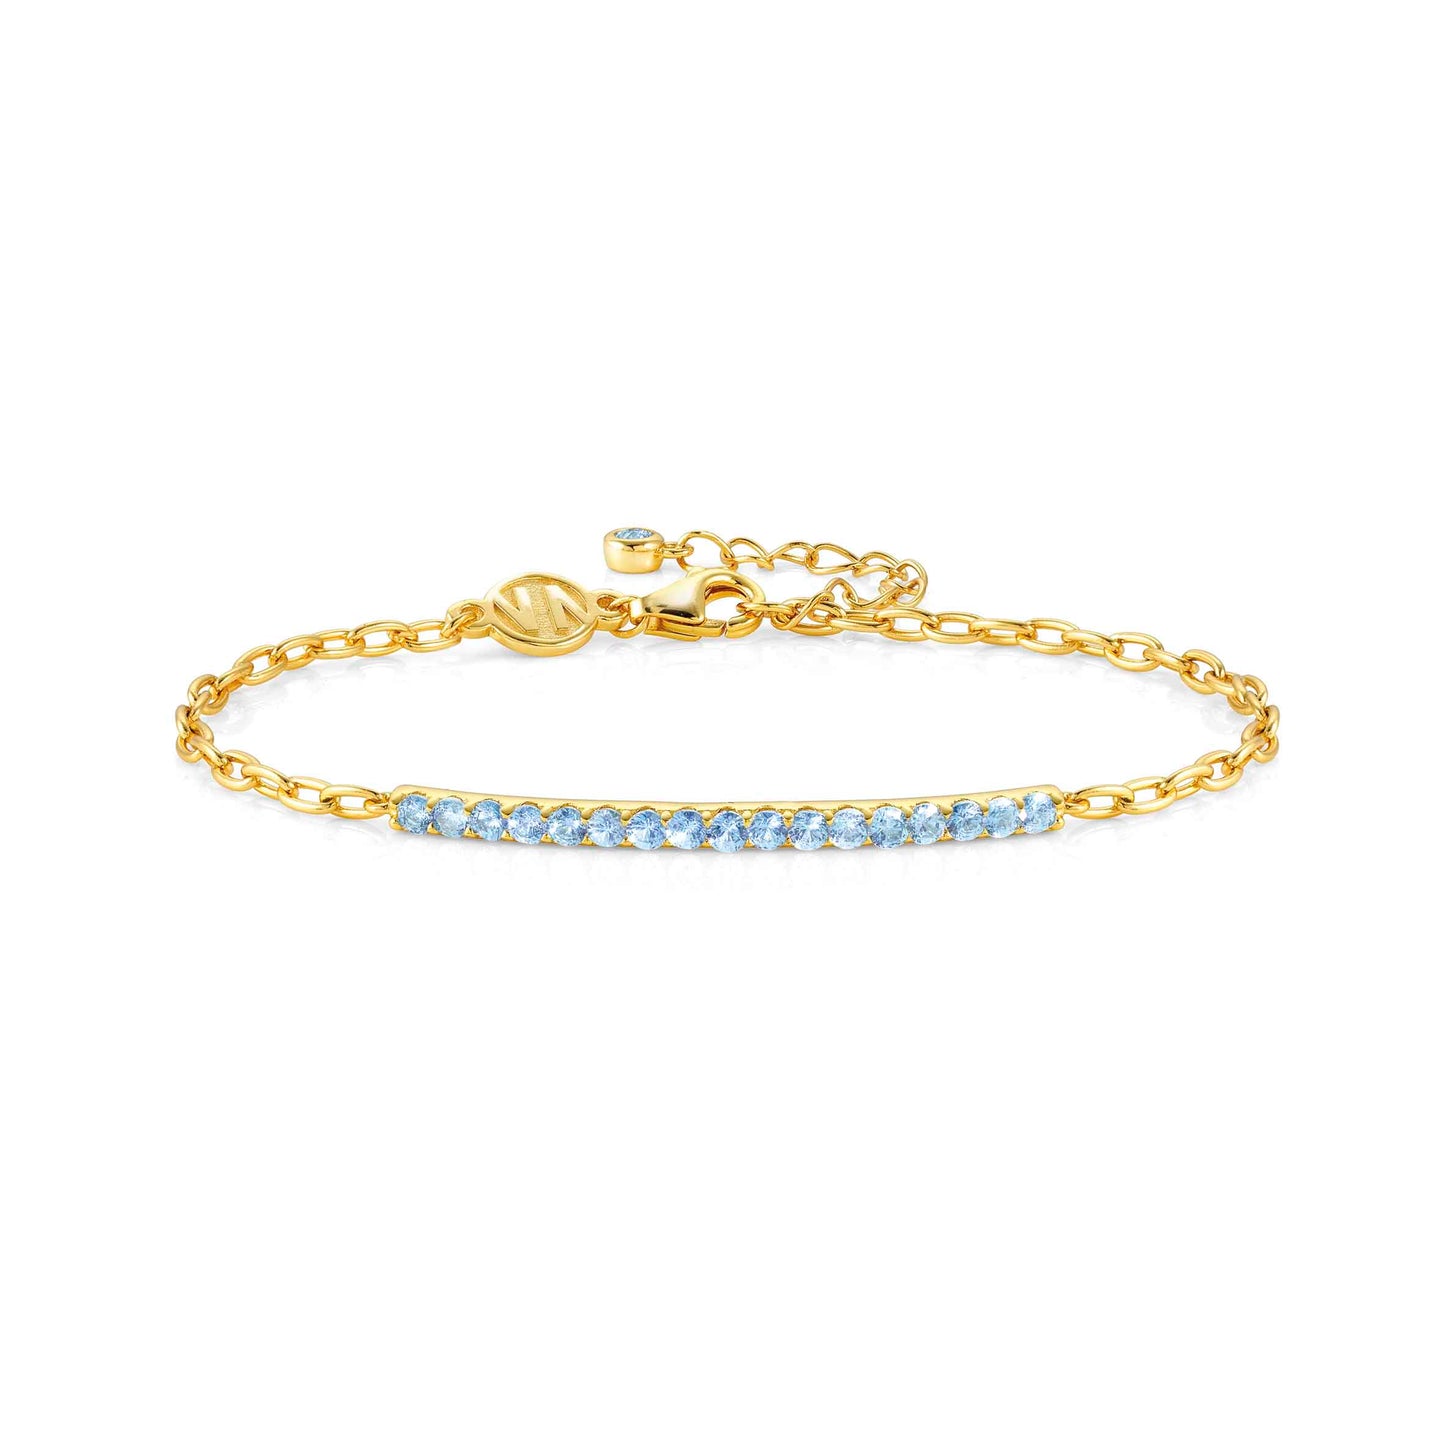 149703/020D LOVELIGHT Sterling Silver and 18ct Yellow Gold Plated Bracelet with Light Blue Cubic Zirconia Stones